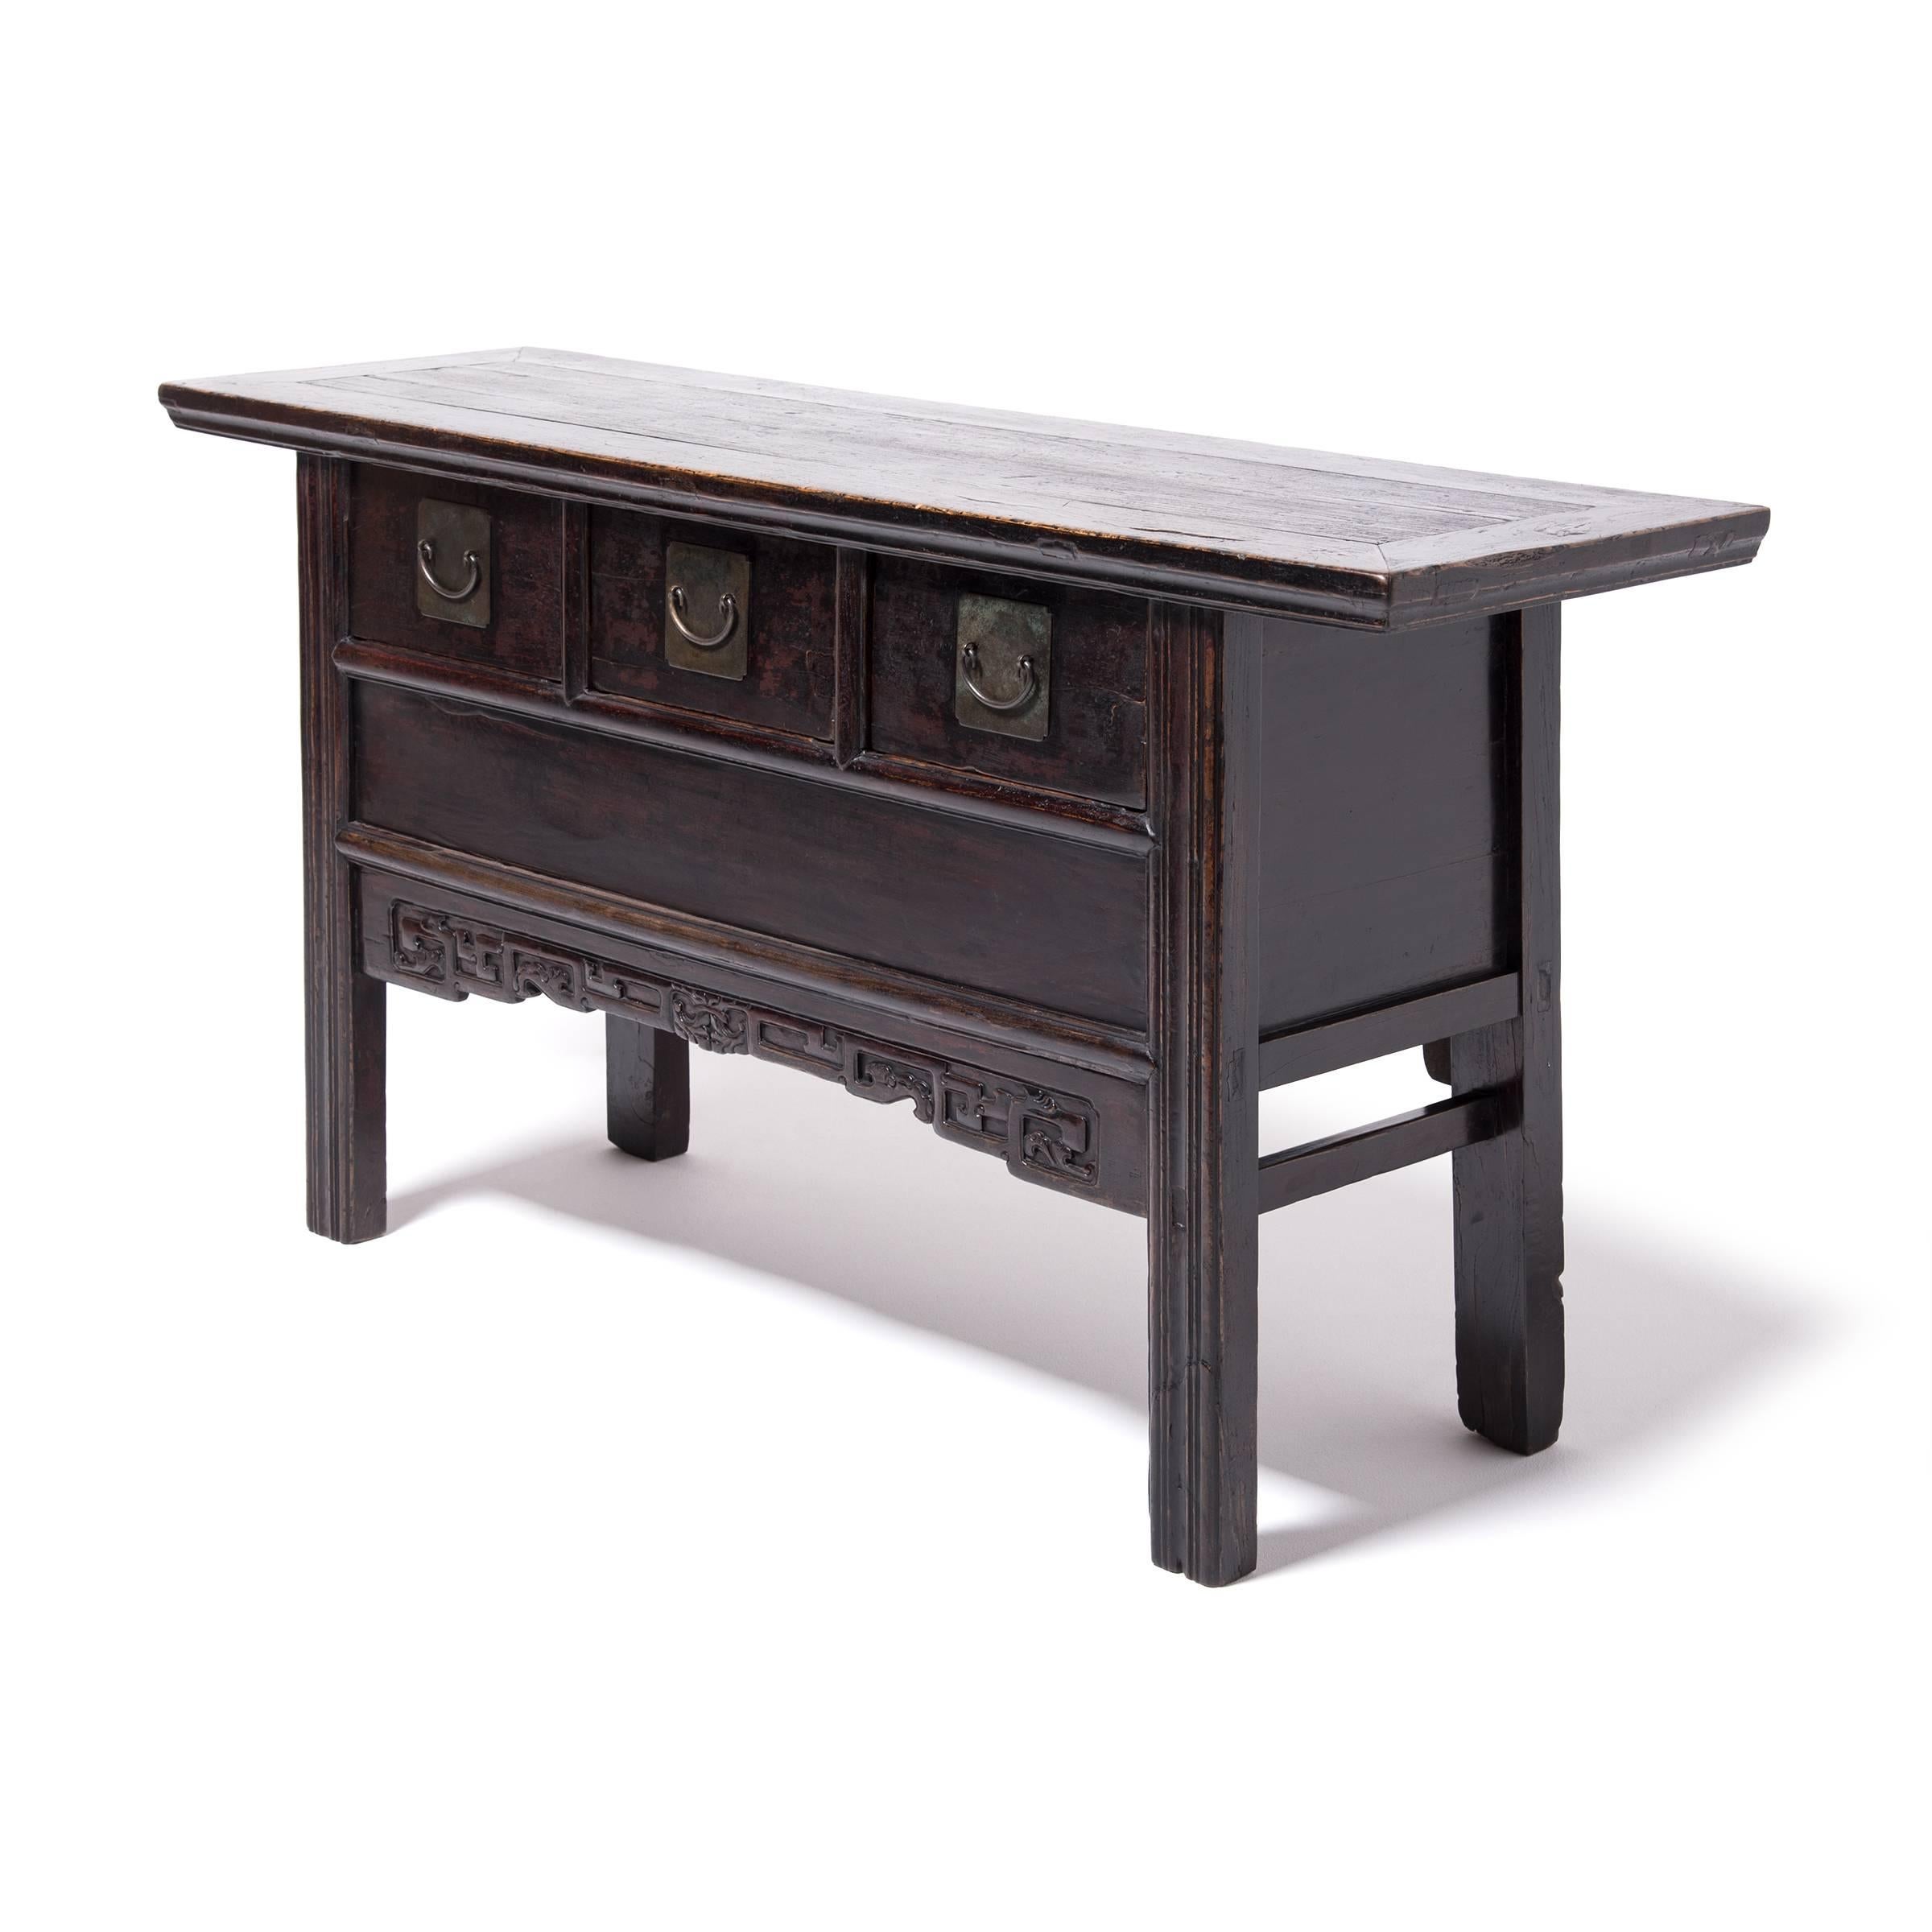 The sleek design of this 19th century three drawer table is generally attributed to the minimal style of the Ming period (1368-1644). It was handcrafted in China’s Henan province out of local elmwood. The quality of the workmanship is evident by its